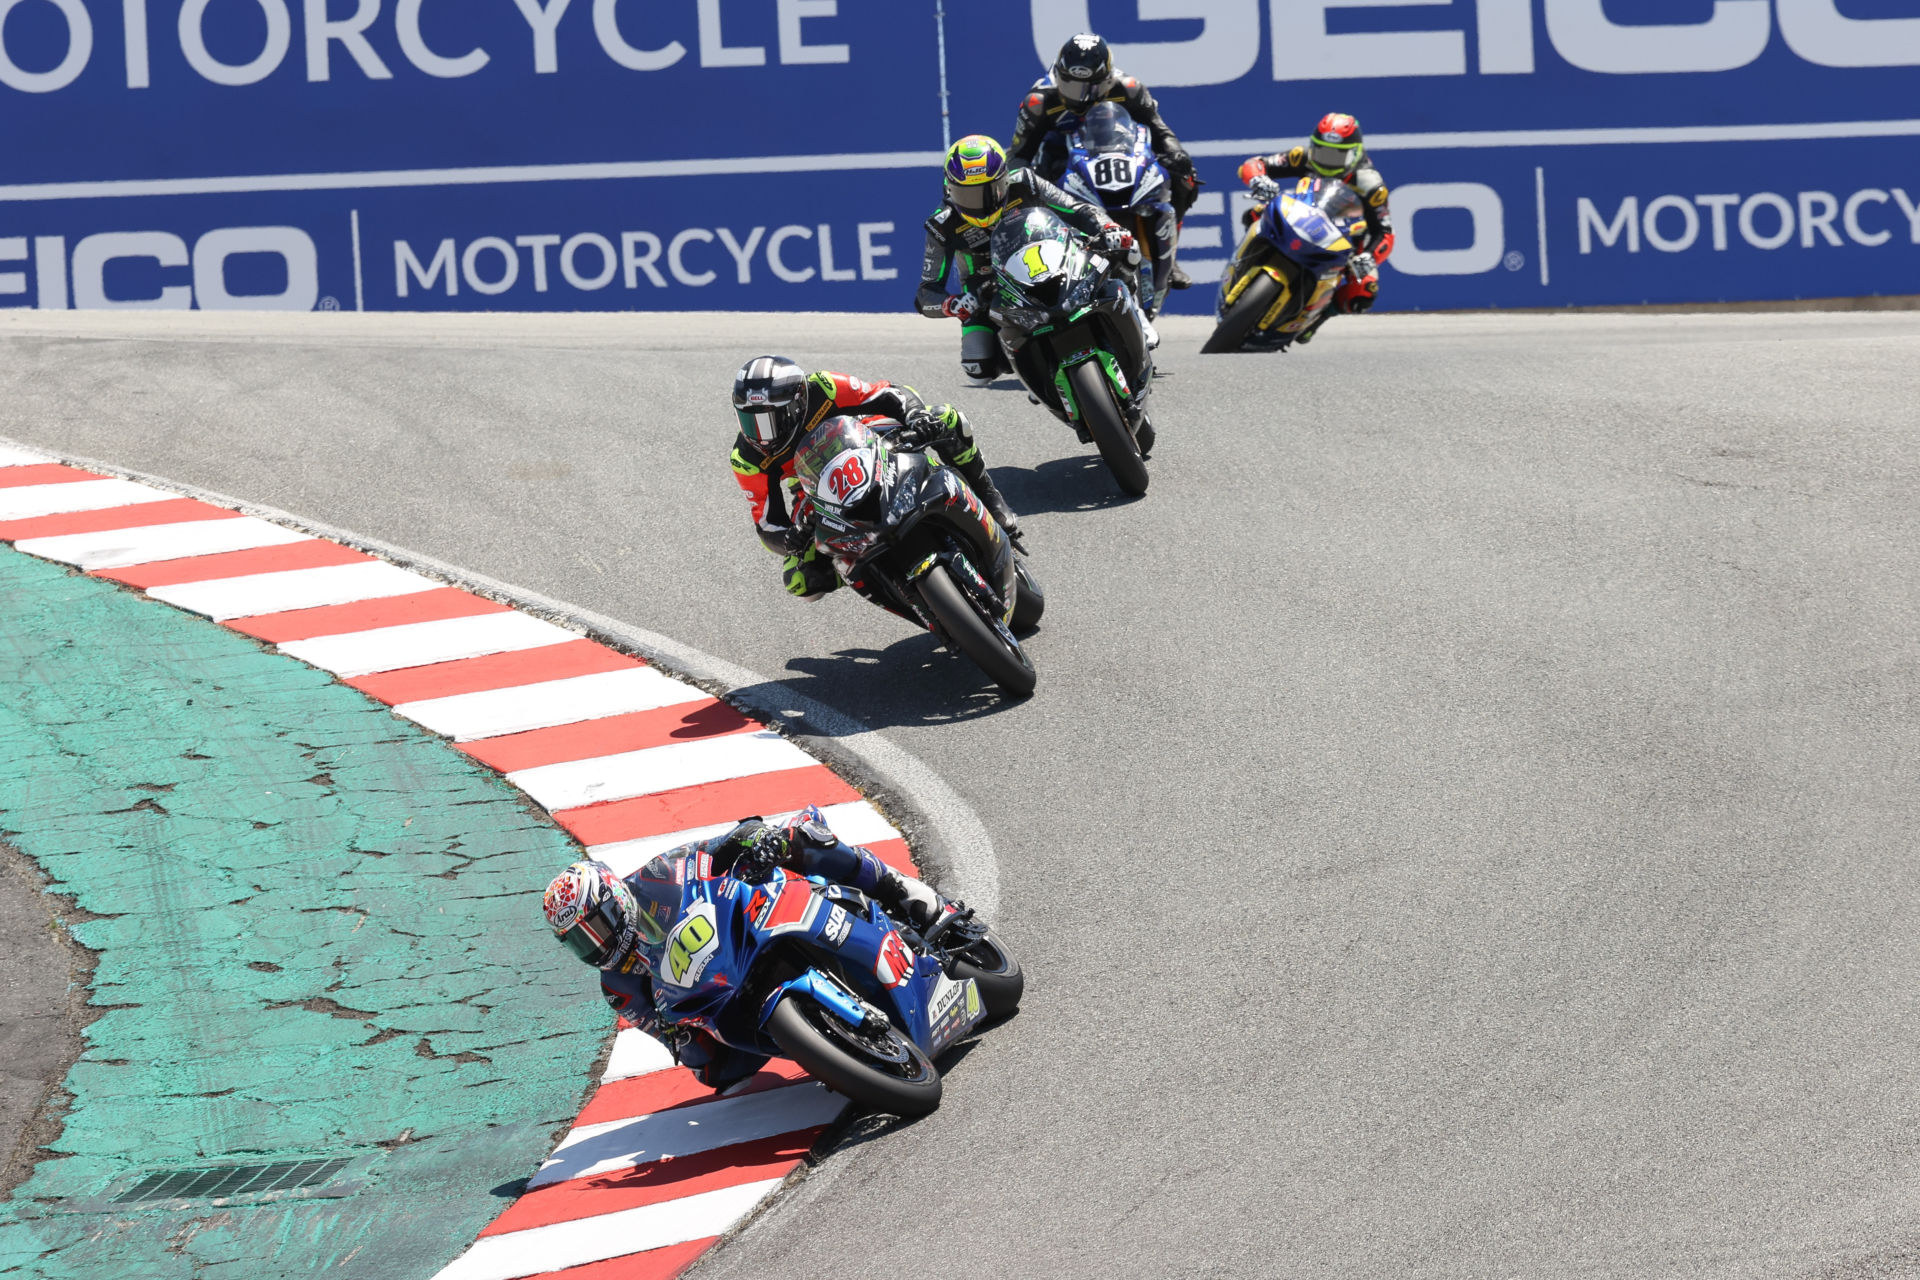 Sean Dylan Kelly (40) leads Cory Ventura (28), Richie Escalante (1), Benjamin Smith (88), and Kevin Olmedo (16) down the Corkscrew early in Supersport Race Two at Laguna Seca. Photo by Brian J. Nelson, courtesy MotoAmerica.